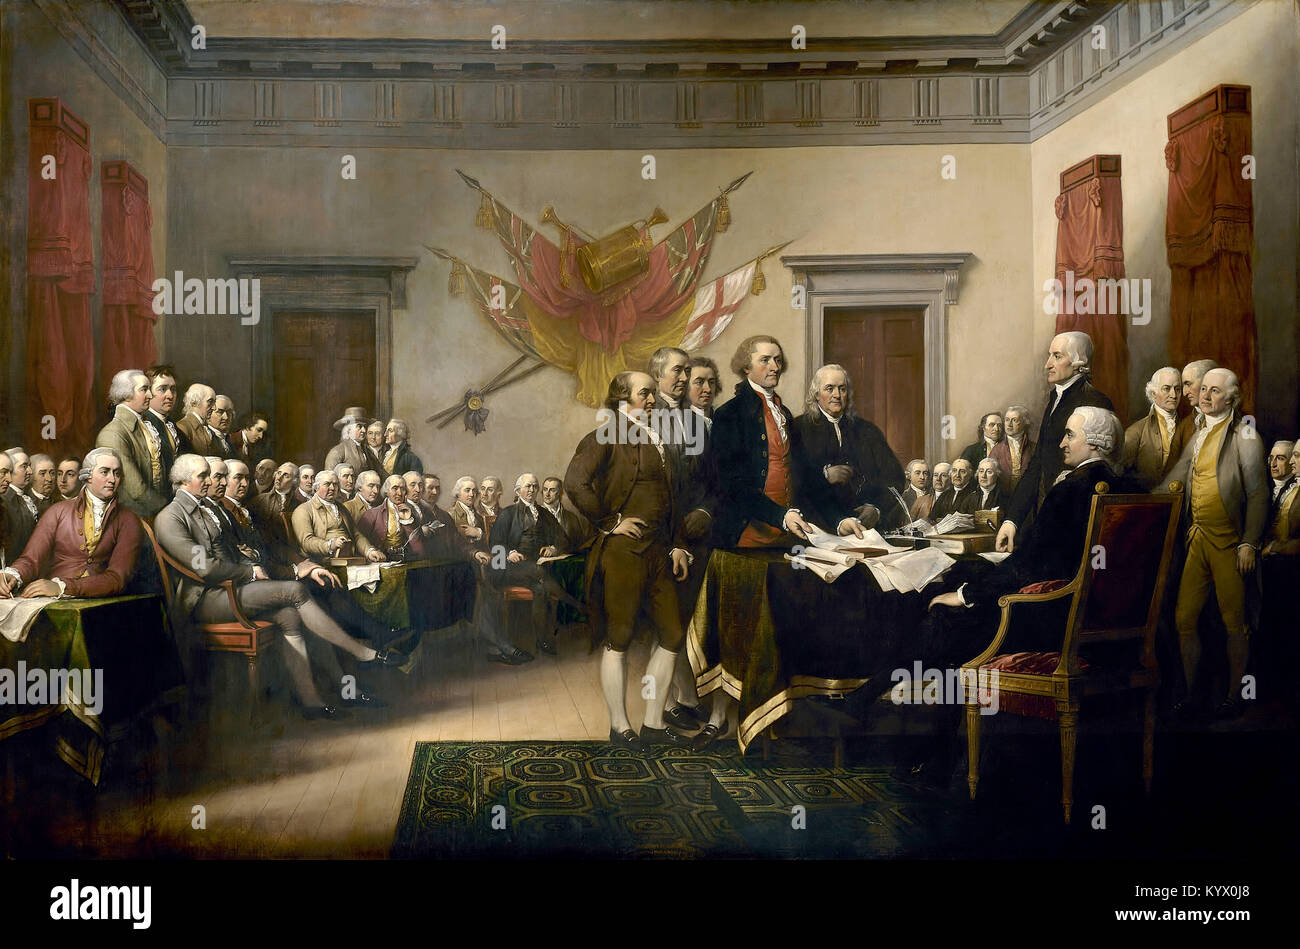 The Committee of Five of the Second Continental Congress was a team of five men who drafted and presented to the Congress what would become America's Declaration of Independence of July 4, 1776. This Declaration committee operated from June 11, 1776 until July 5, 1776, the day on which the Declaration was published. Stock Photo